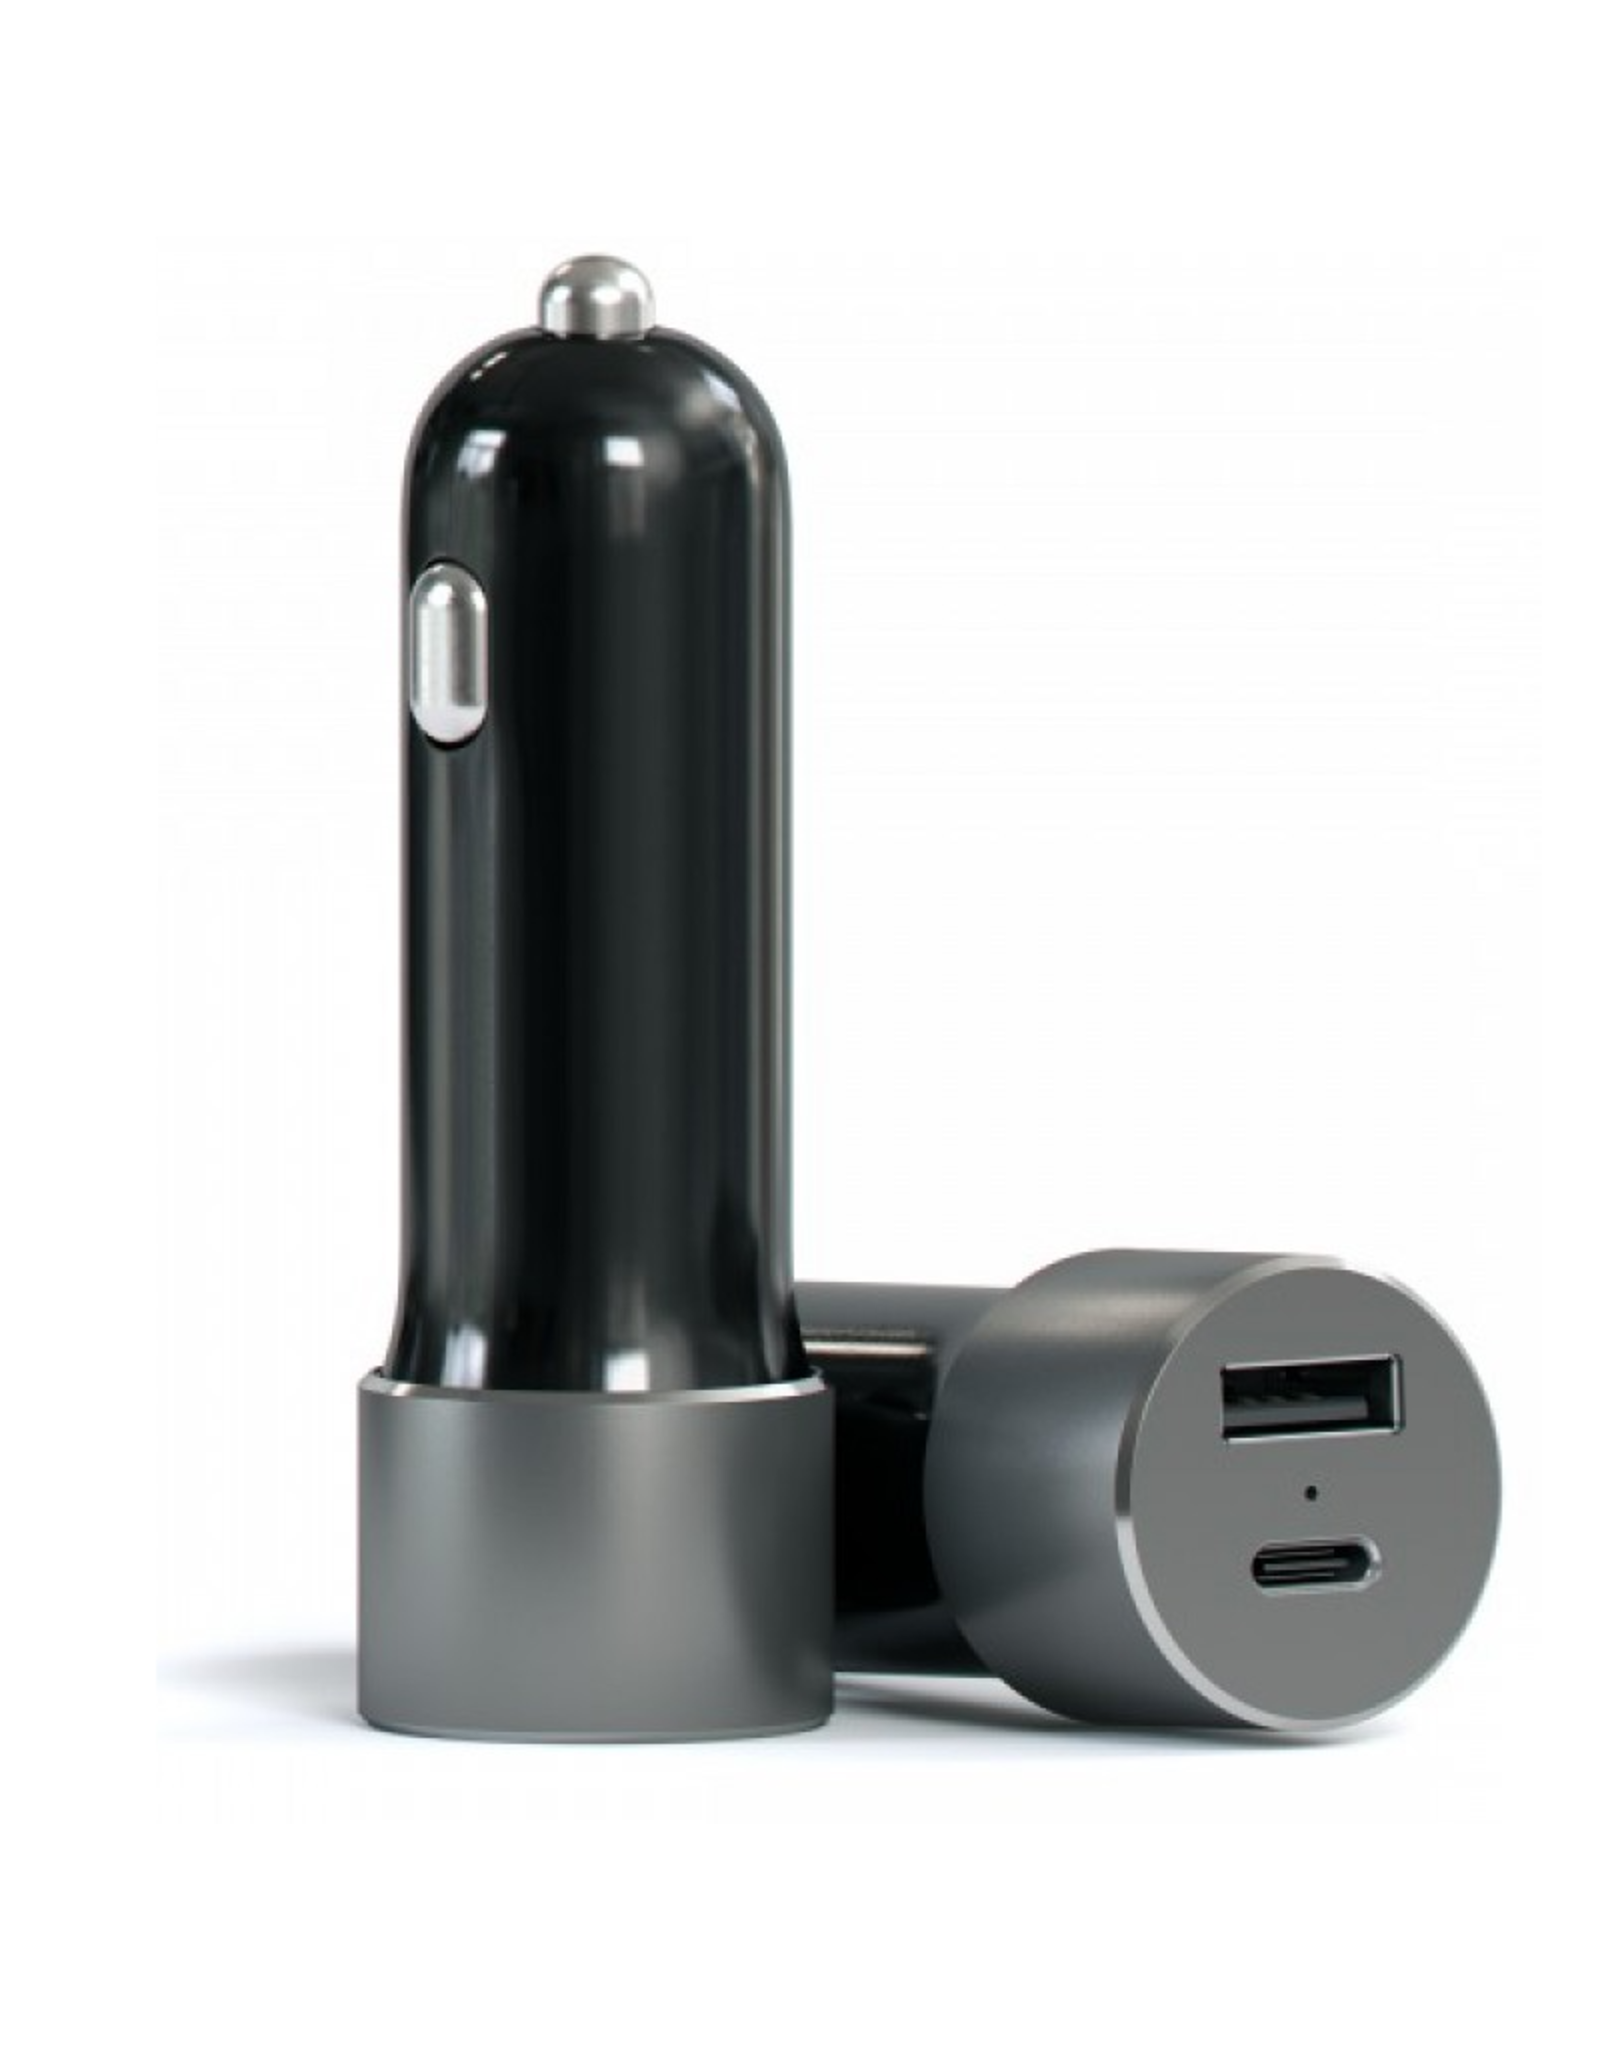 Satechi SATECHI Type-C USB Car Charger Space Grey EOL